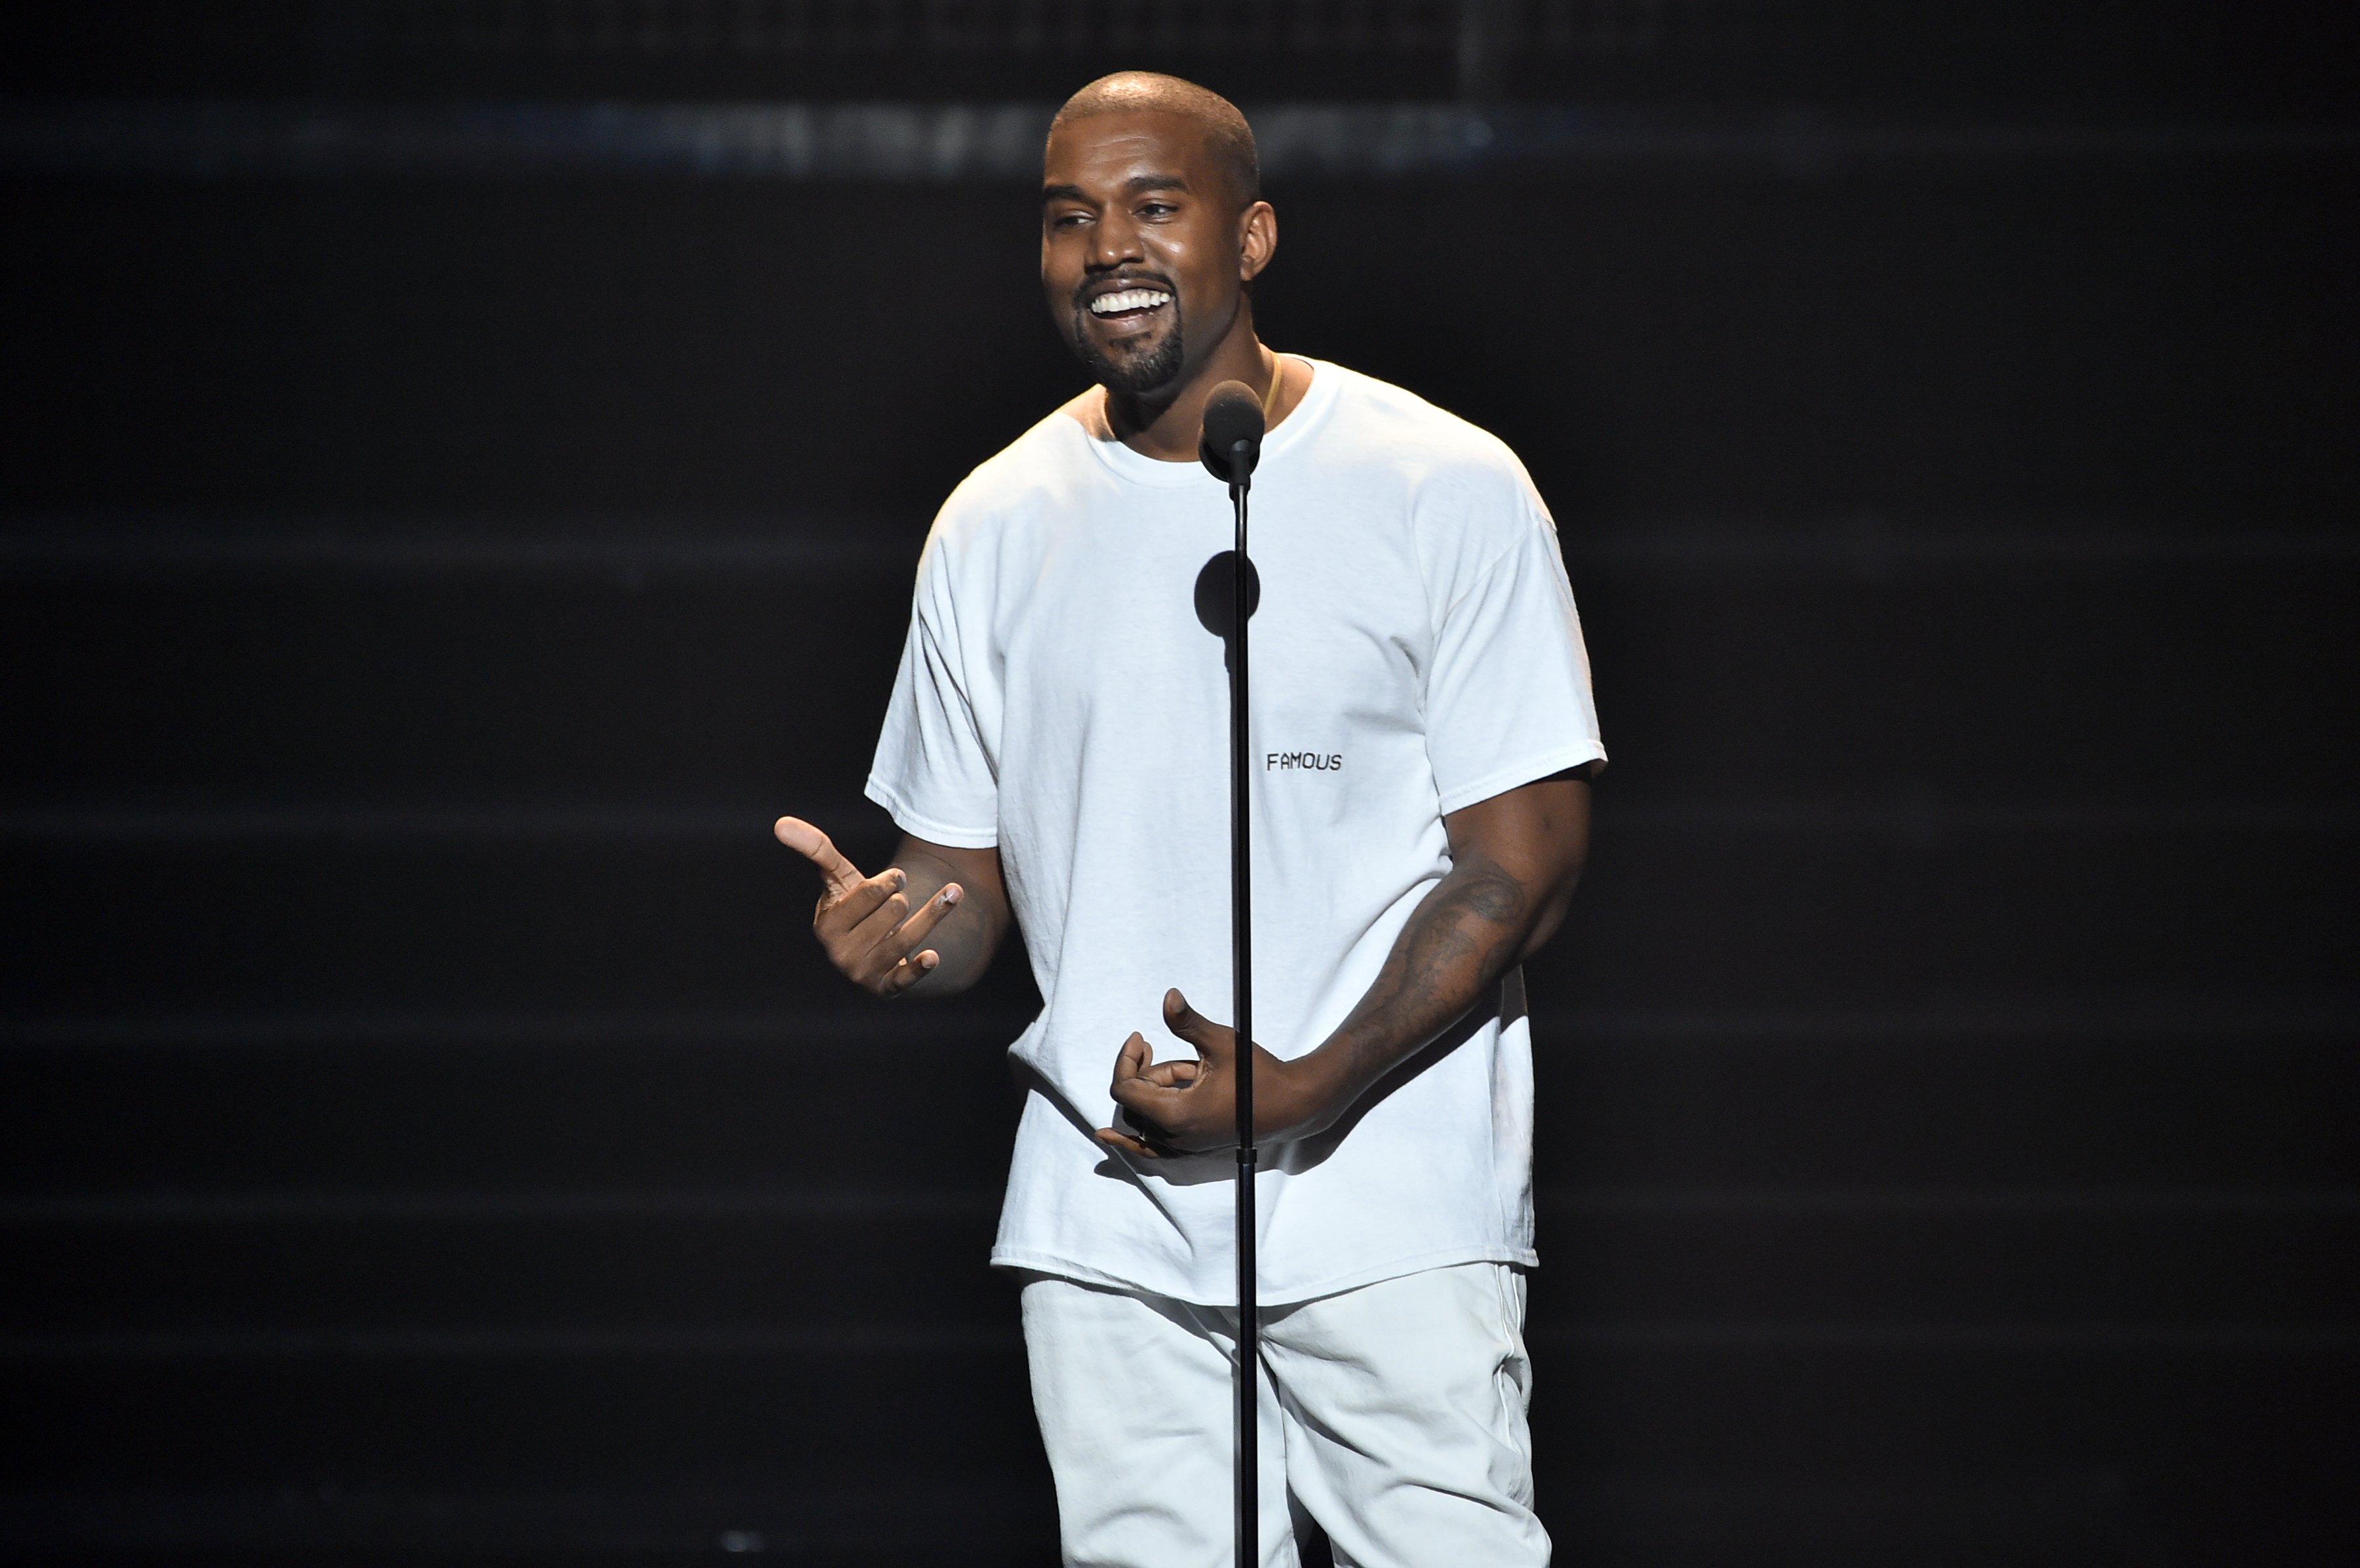 Kanye West performs onstage during the 2016 MTV Video Music Awards at Madison Square Garden on August 28, 2016 in New York City